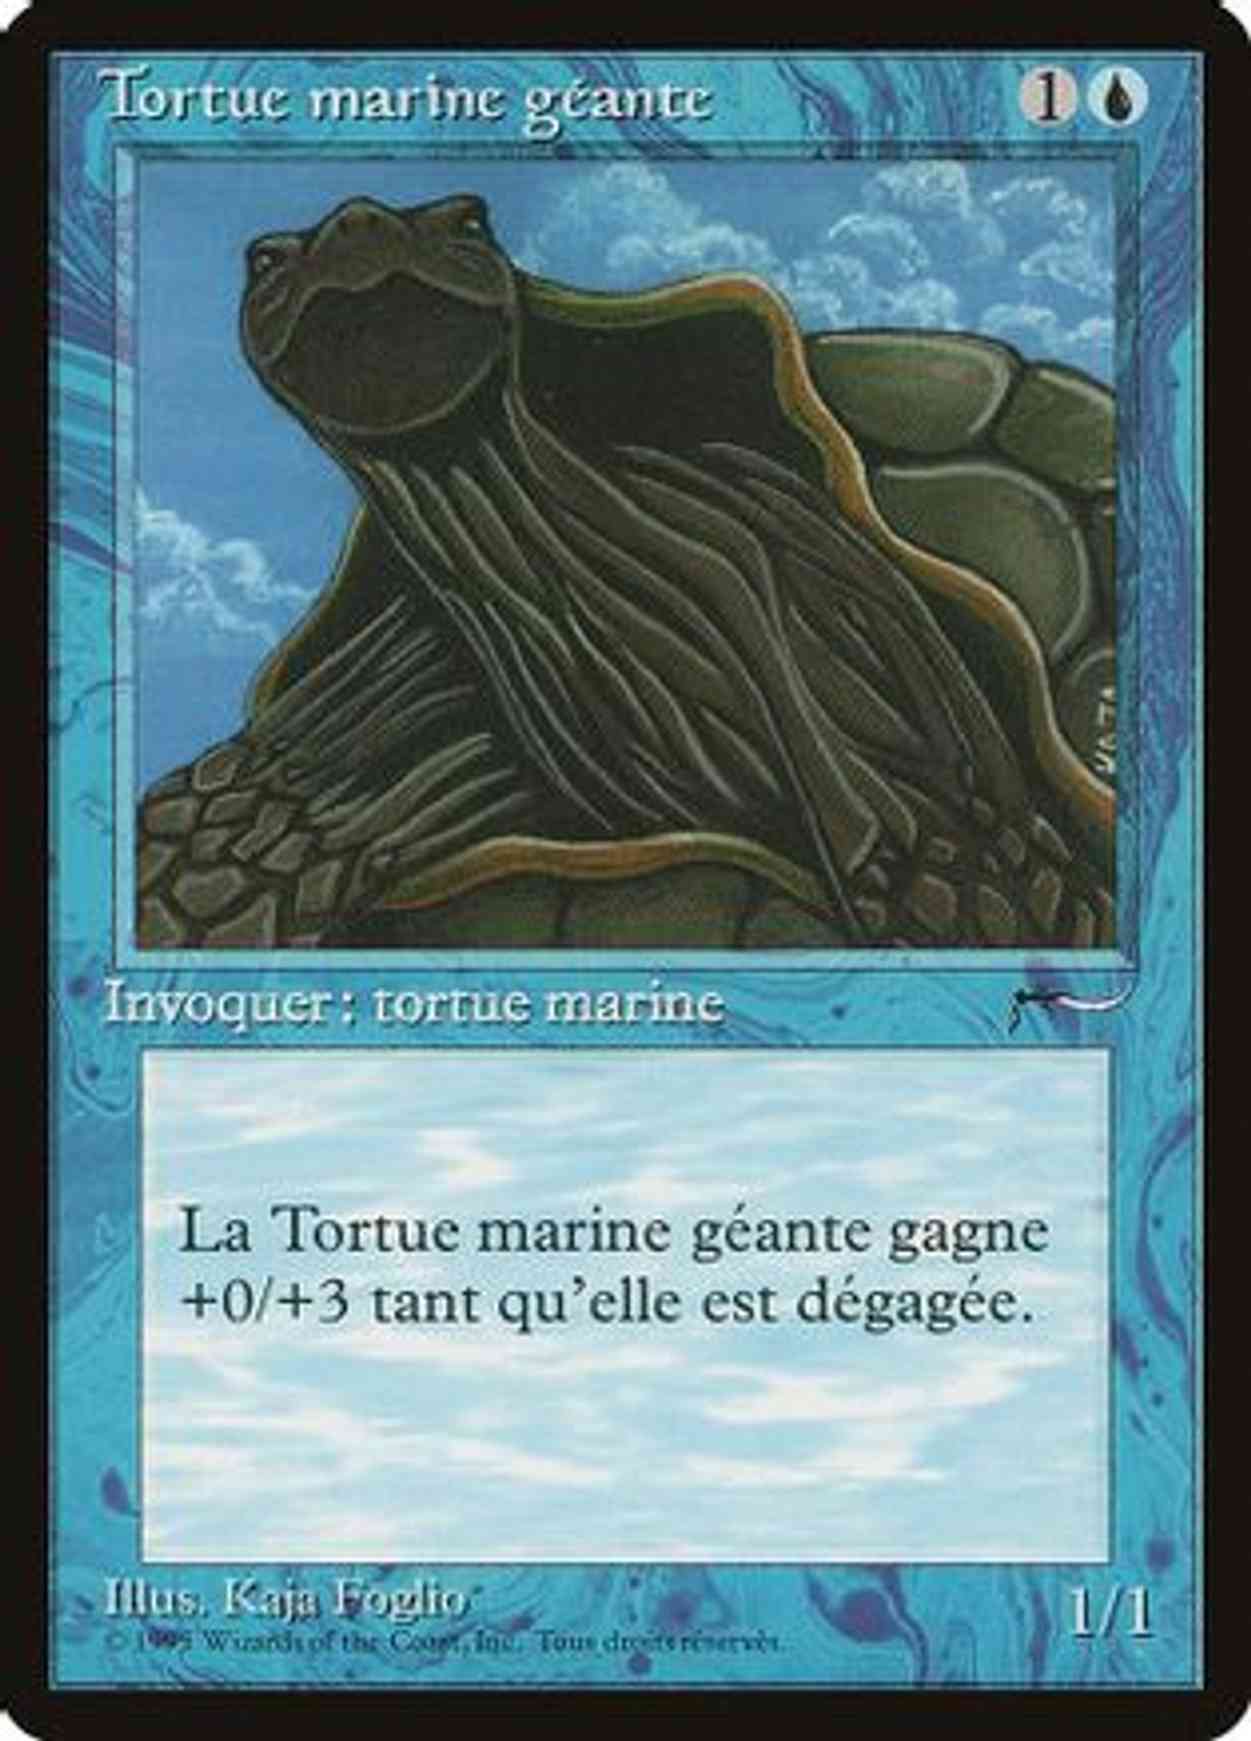 Giant Tortoise (French) - "Tortue marine geante" magic card front